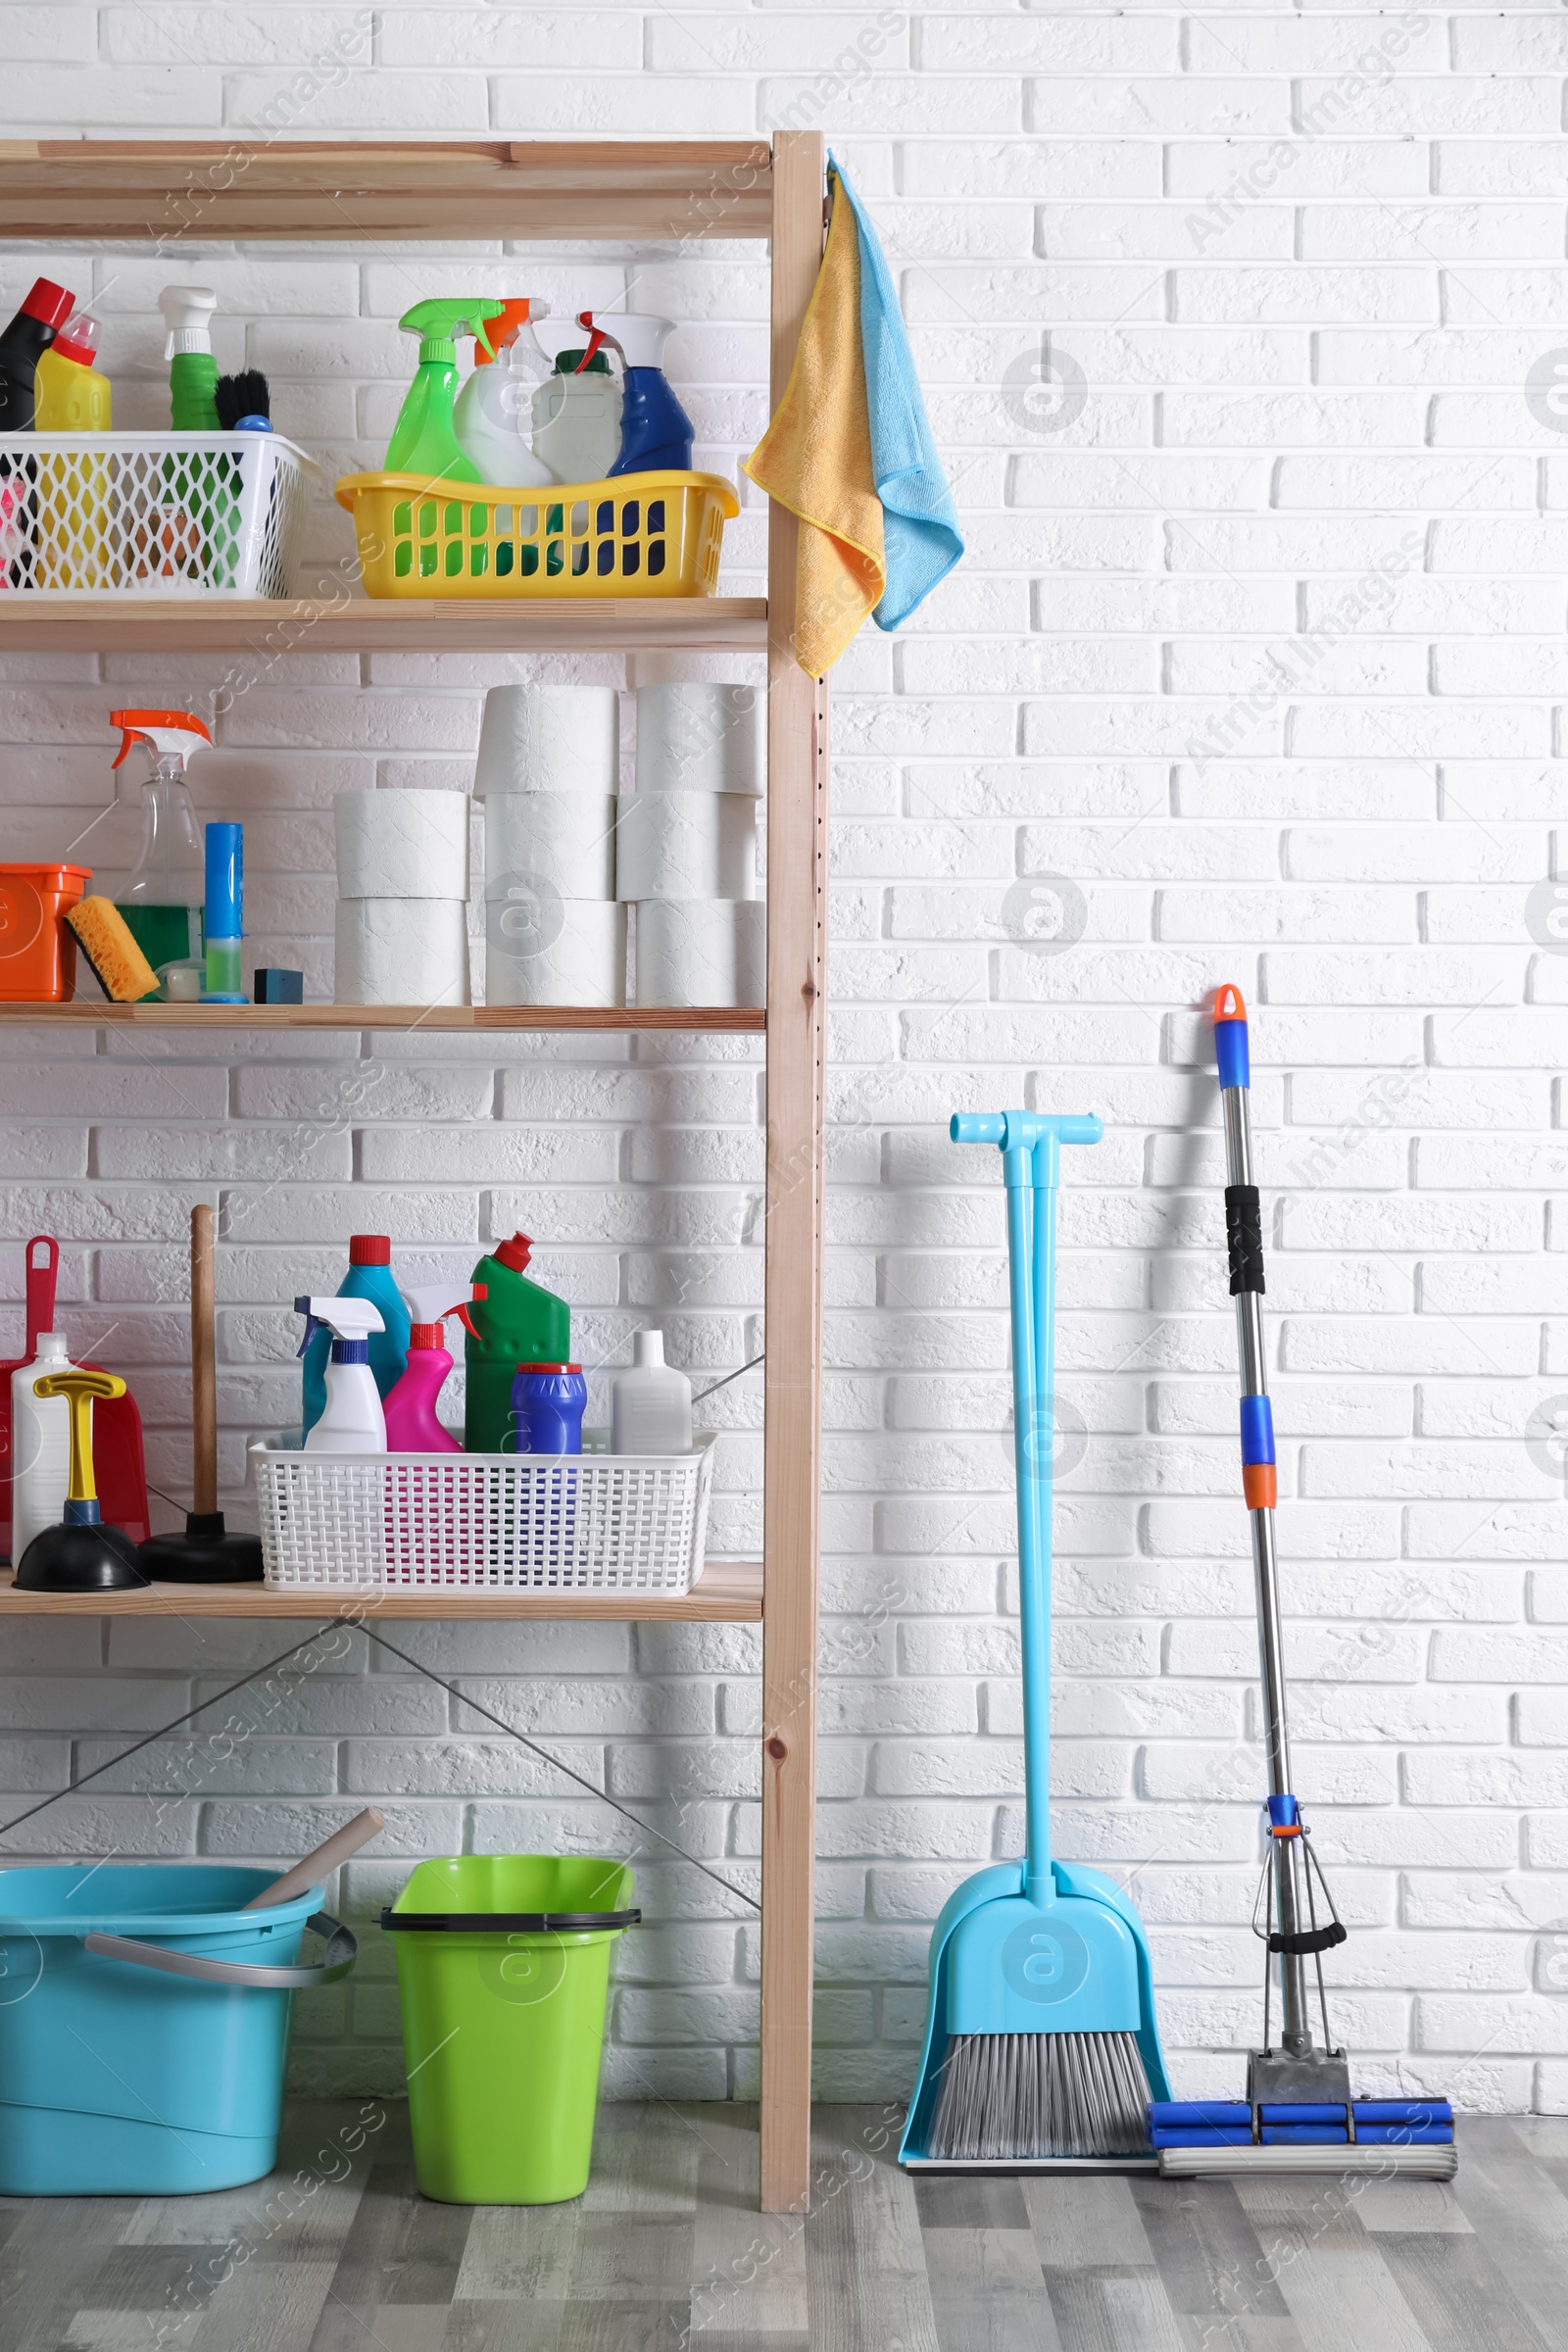 Photo of Shelving unit with detergents, cleaning tools and toilet paper near white brick wall indoors